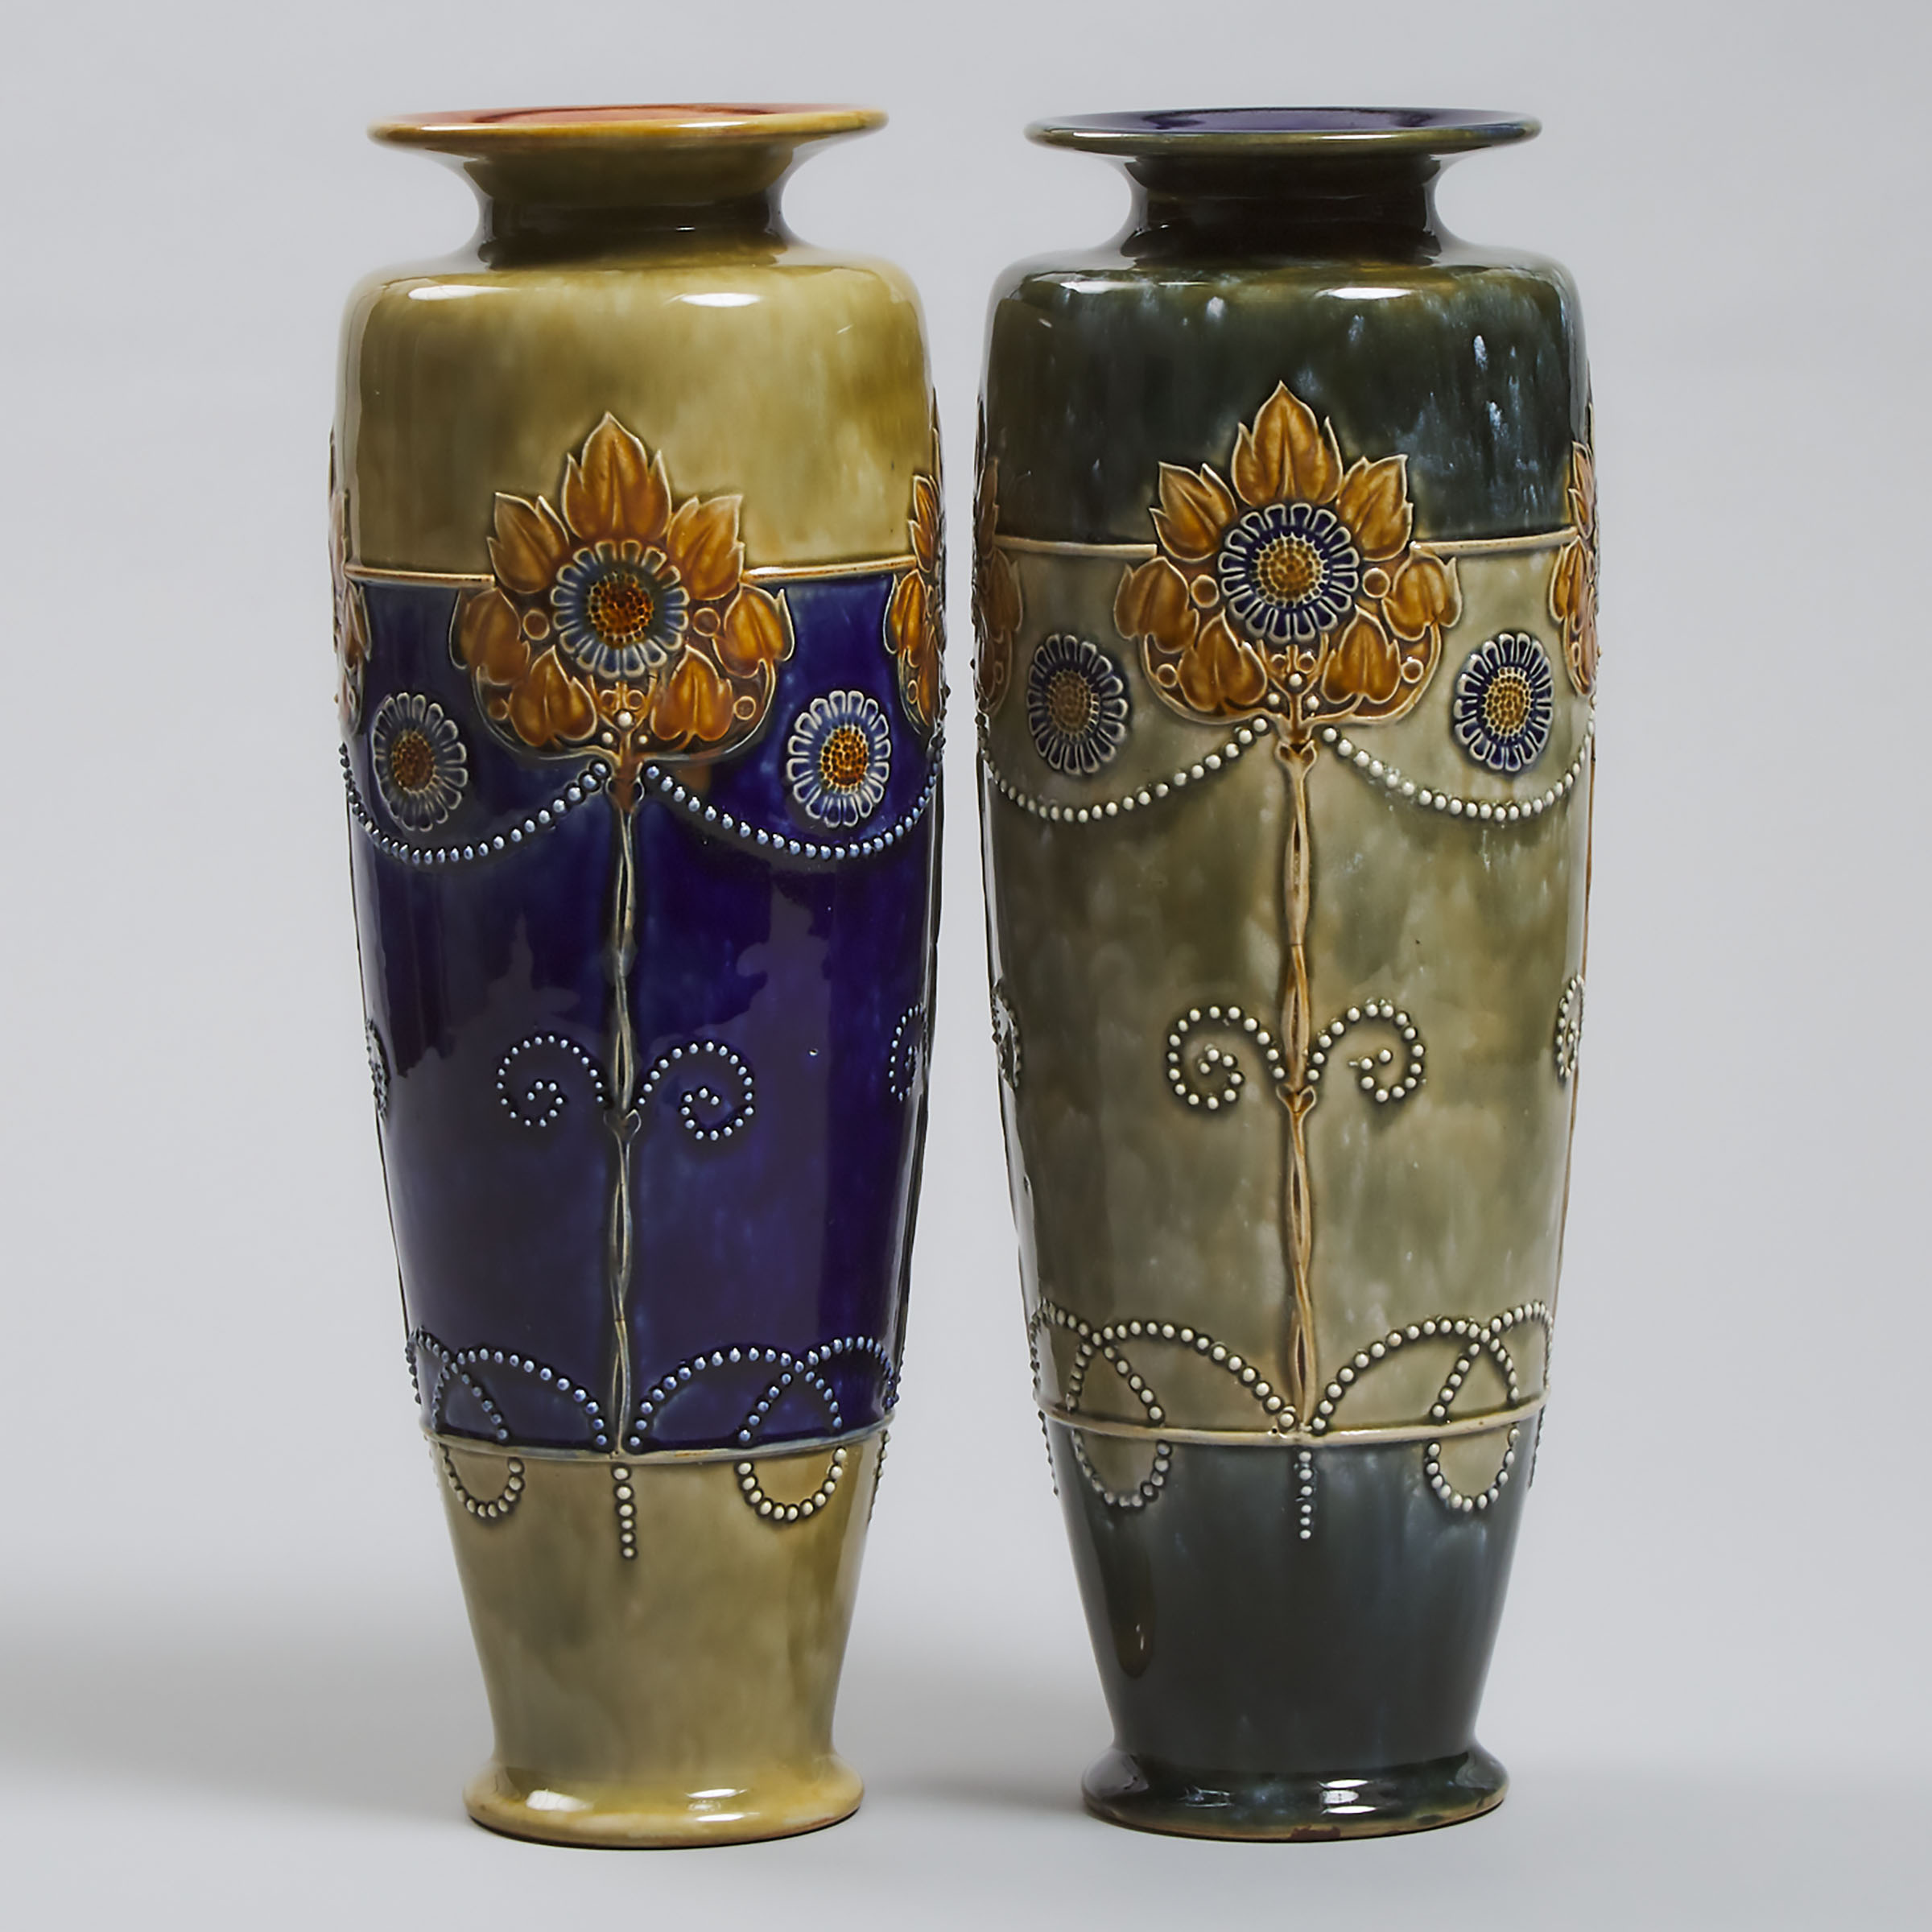 Contrasting Pair of Royal Doulton Stoneware Vases, early 20th century